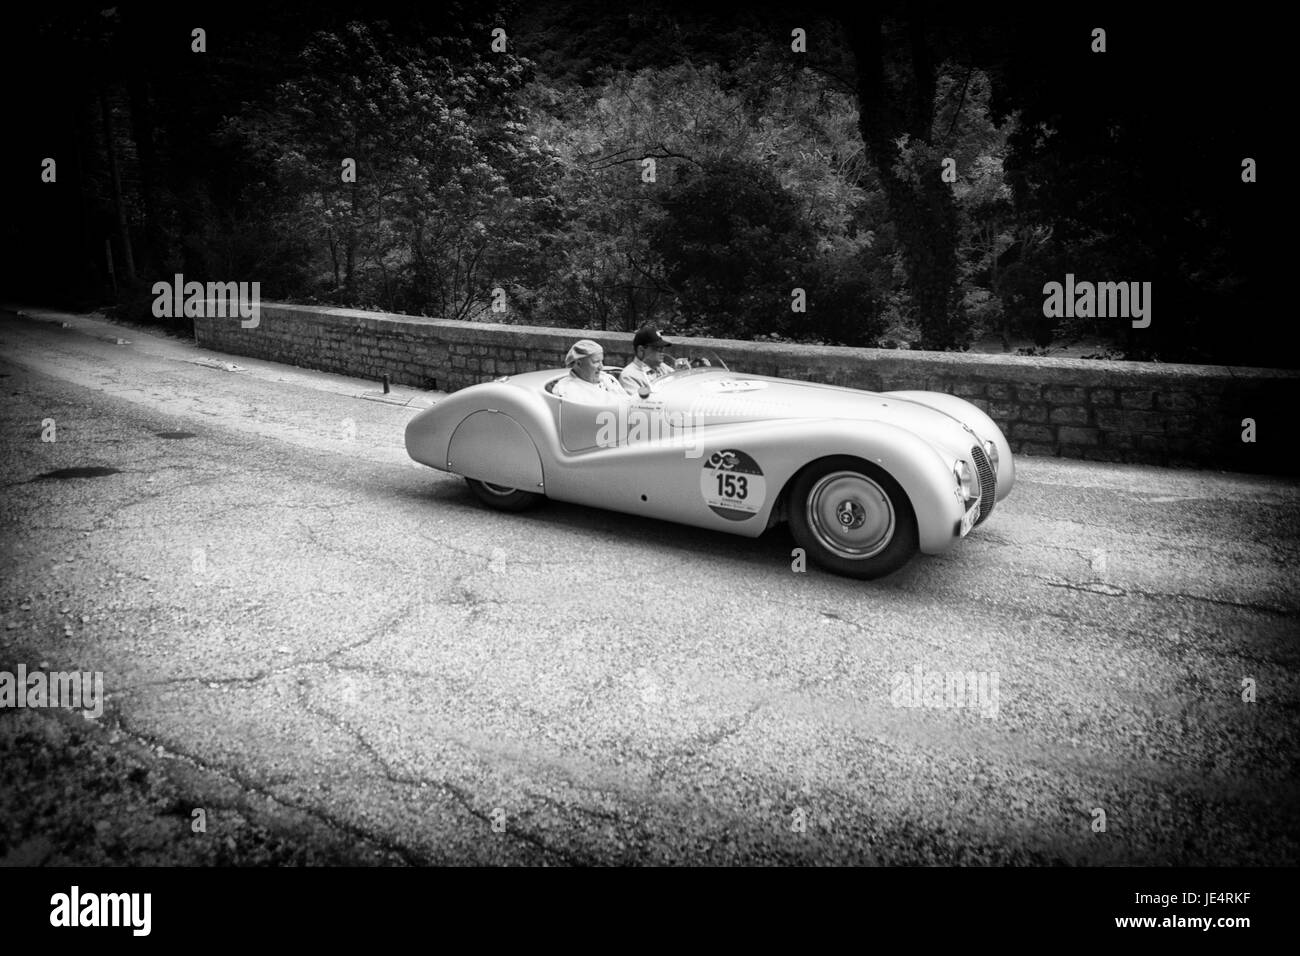 GOLA DEL FURLO, ITALY - MAY 19, 2017: BMW 328 SPIDER MILLE MIGLIA 1939 on an old racing car in rally Mille Miglia 2017 the famous italian historical r Stock Photo